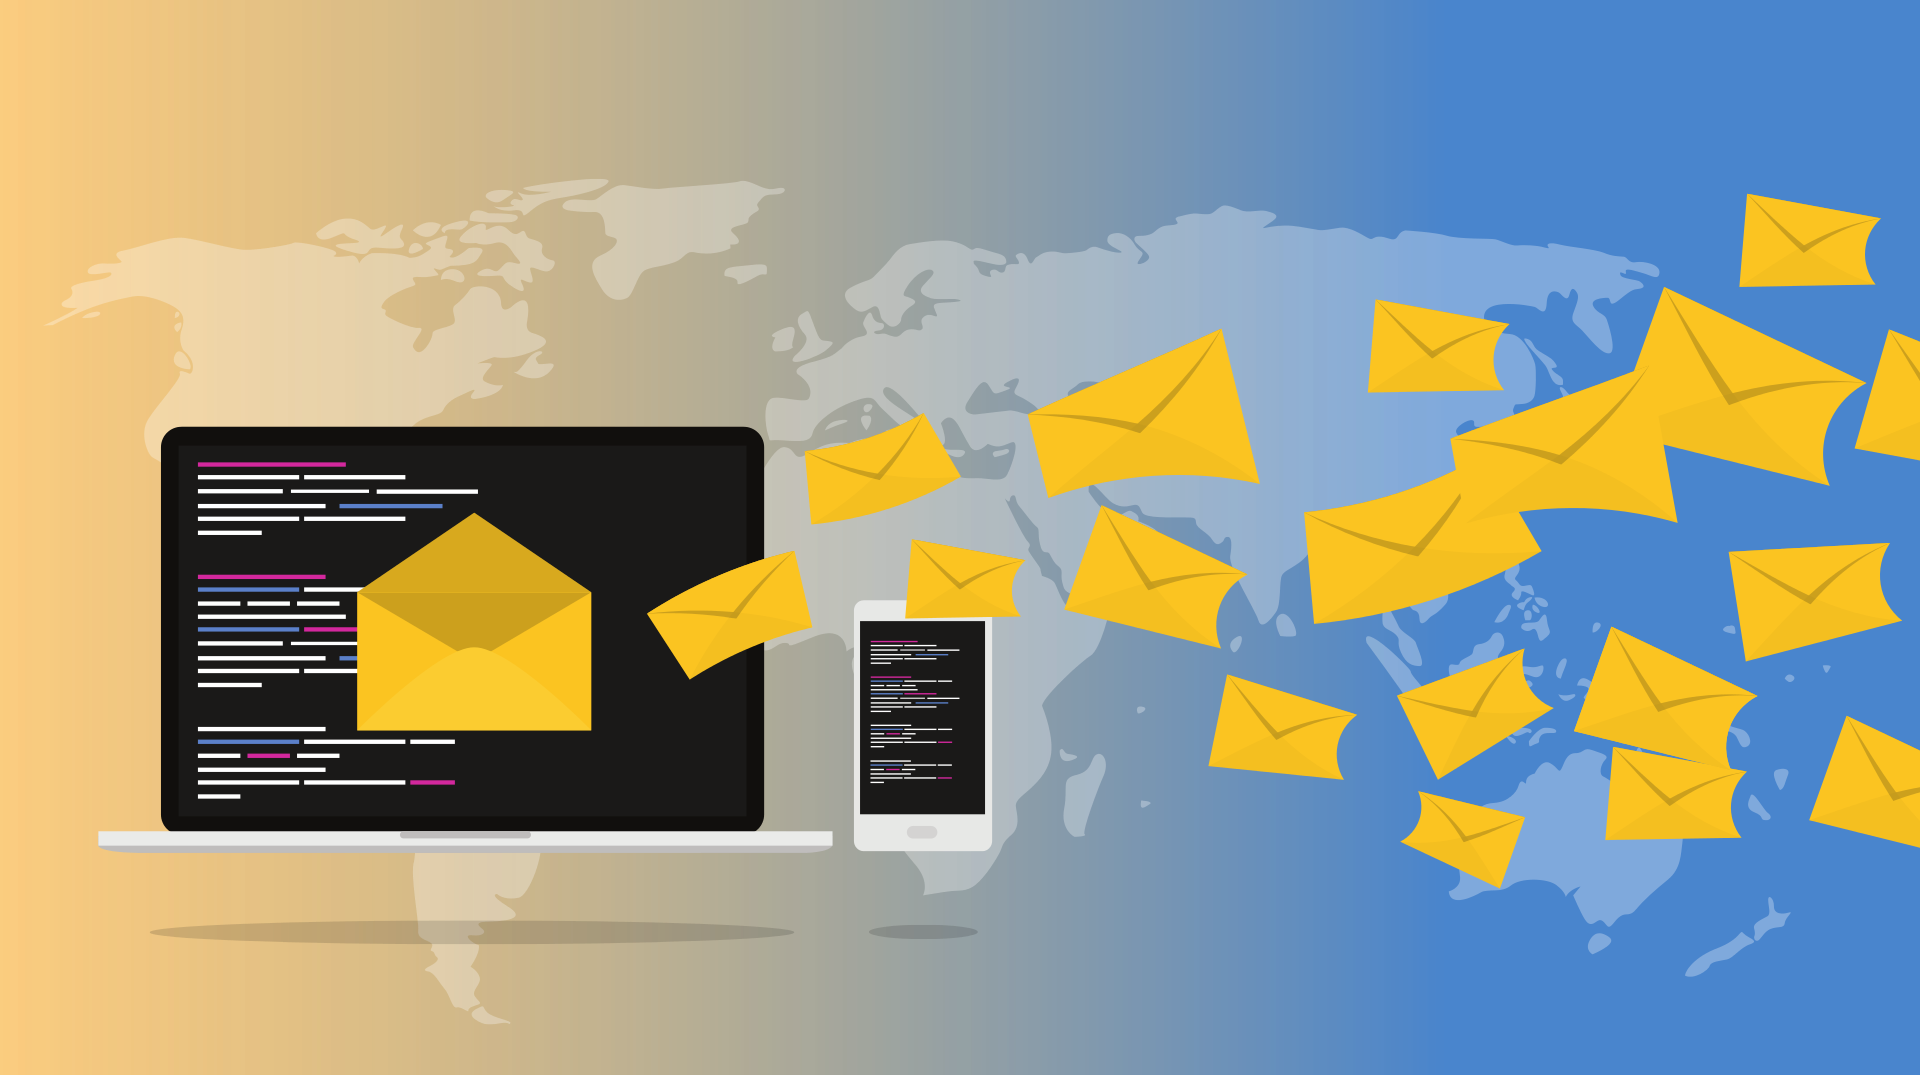 9 Challenges for Email Security Experts - Protecting E-Mail in Times of Crisis